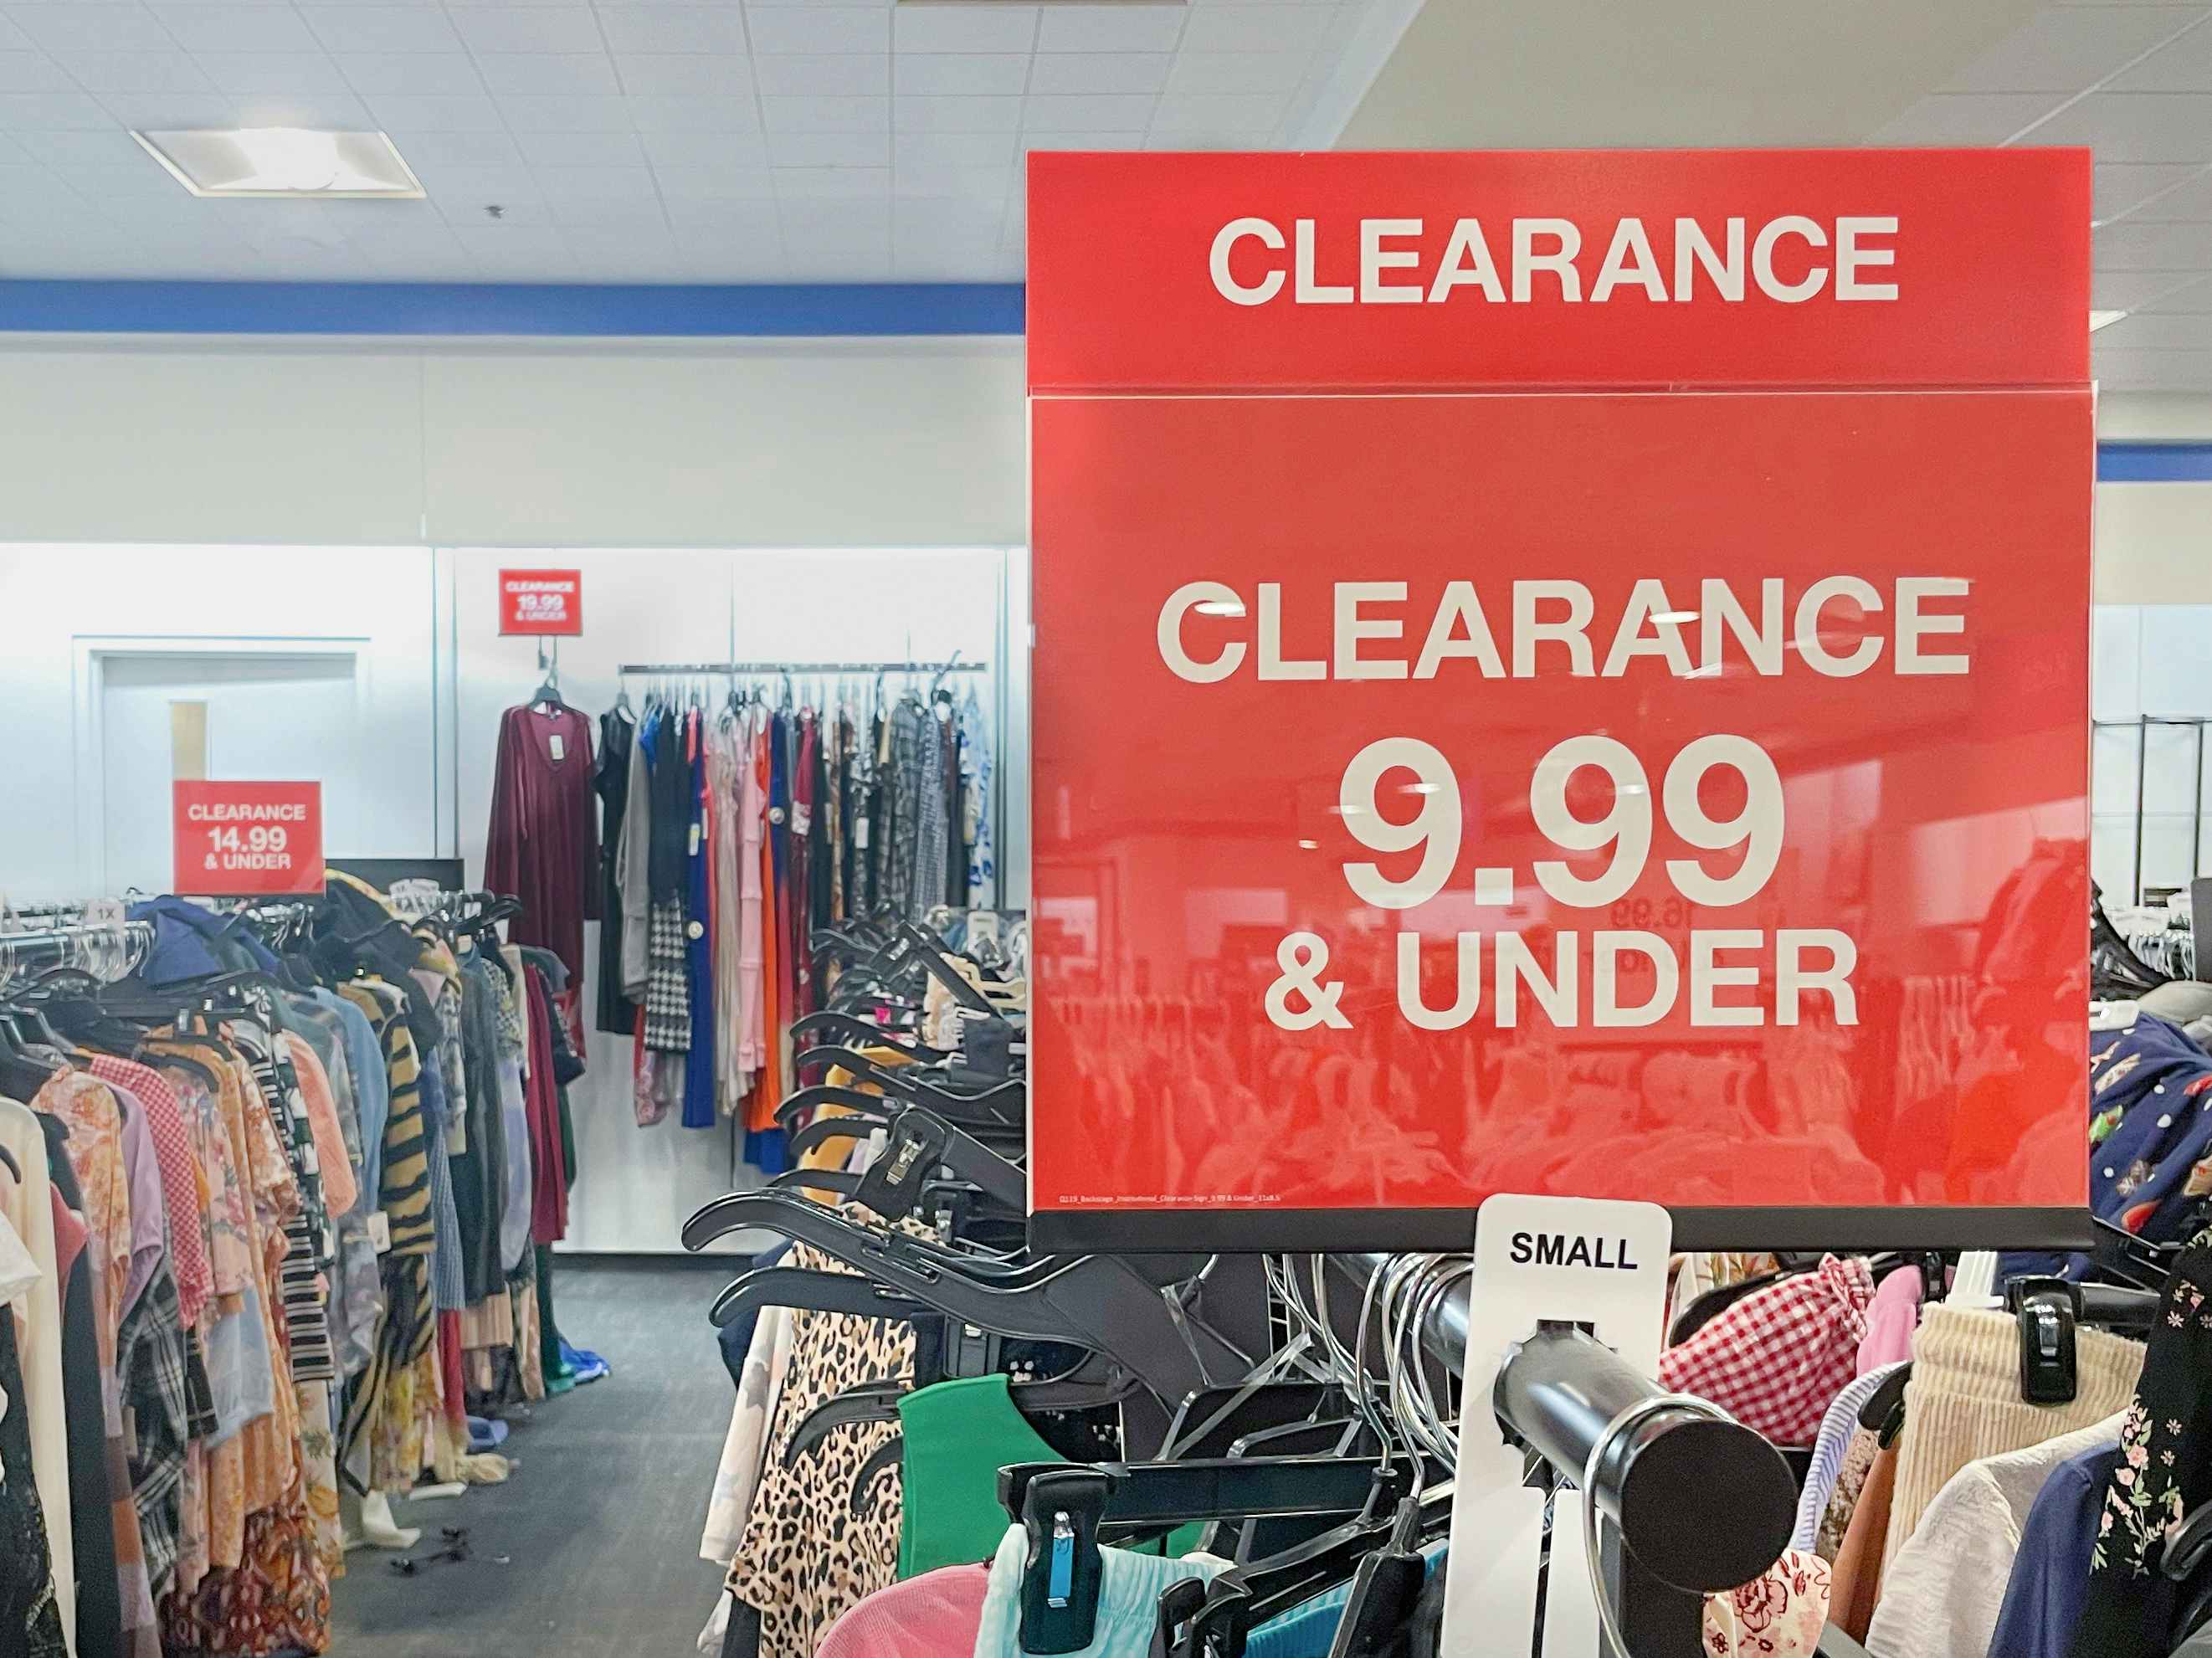 TJ Maxx Vs. Macy's Backstage: Which Discount Store Is Better?